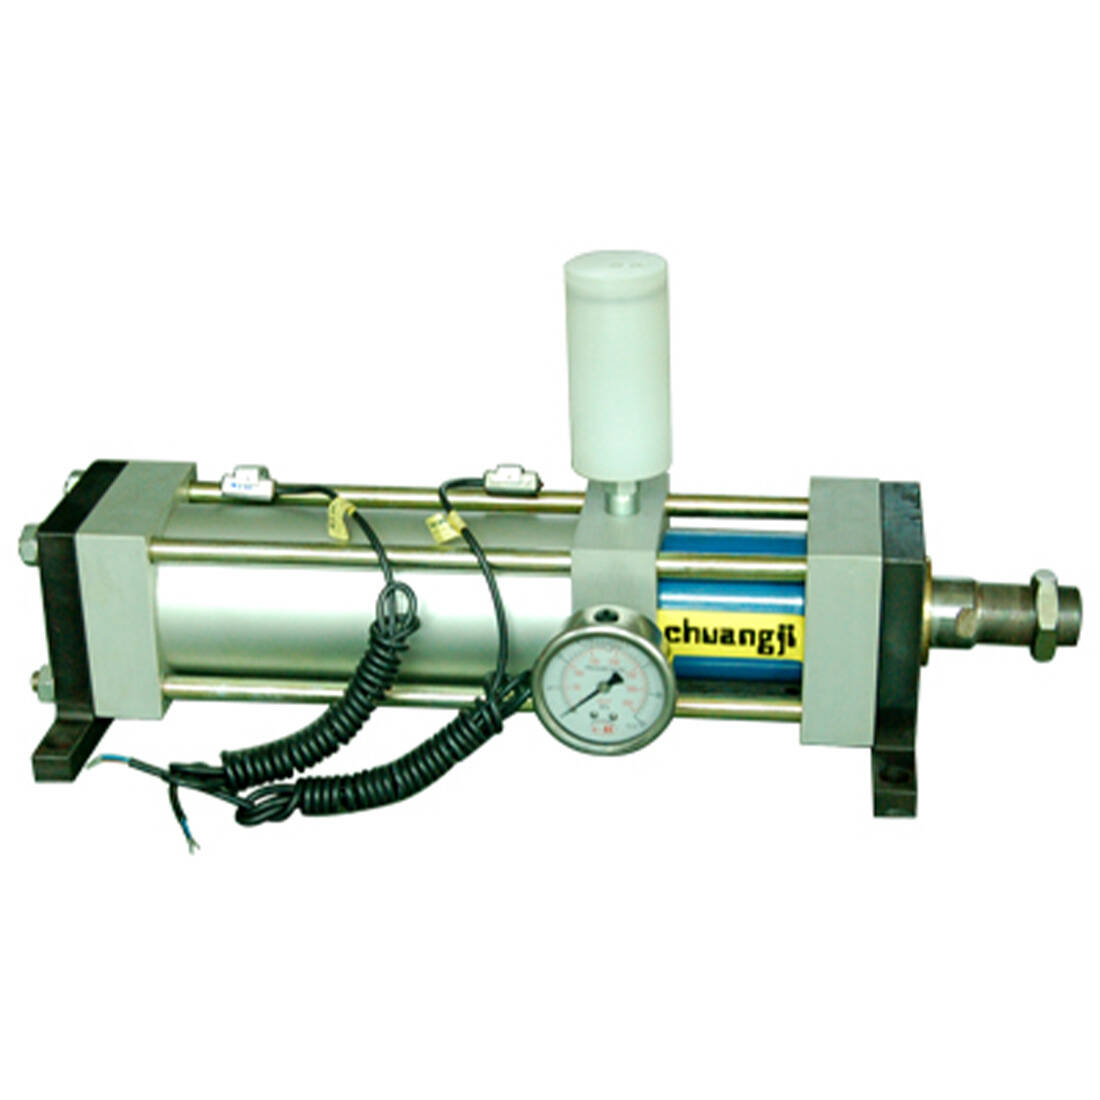 MPTC-2T Direct Pressure Booster Cylinder